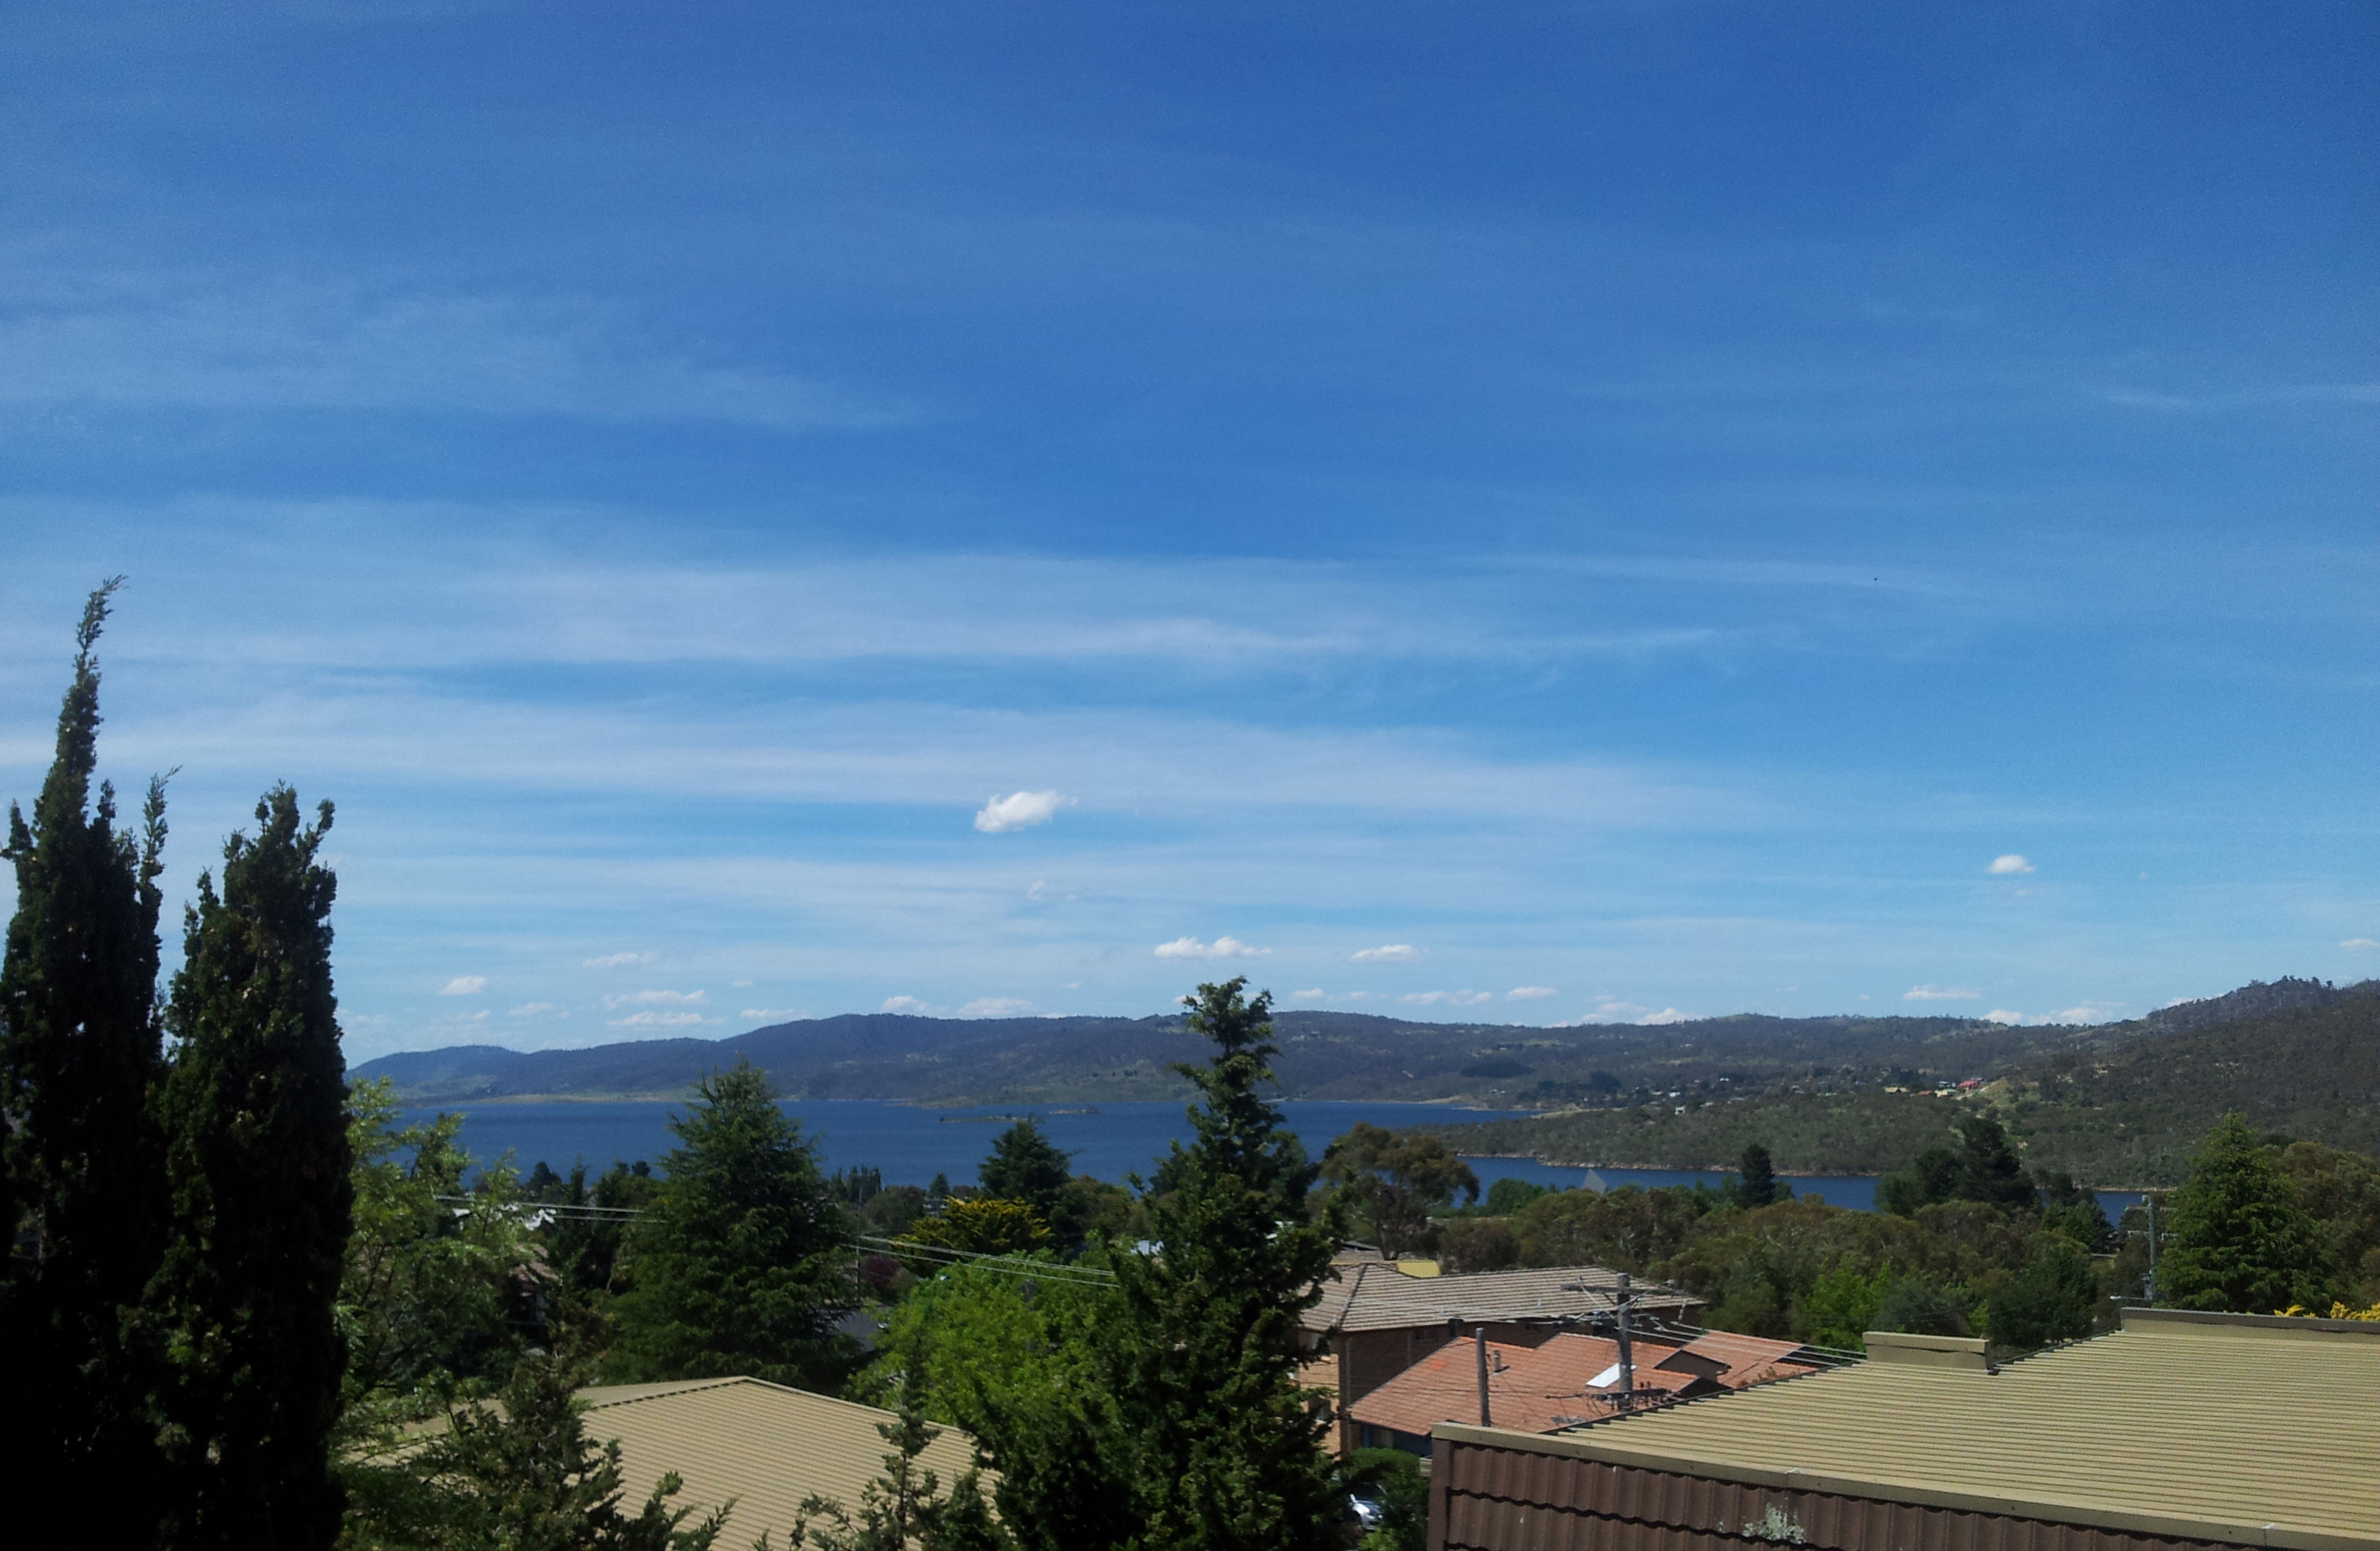 View of Lake Jindabyne on a clear day